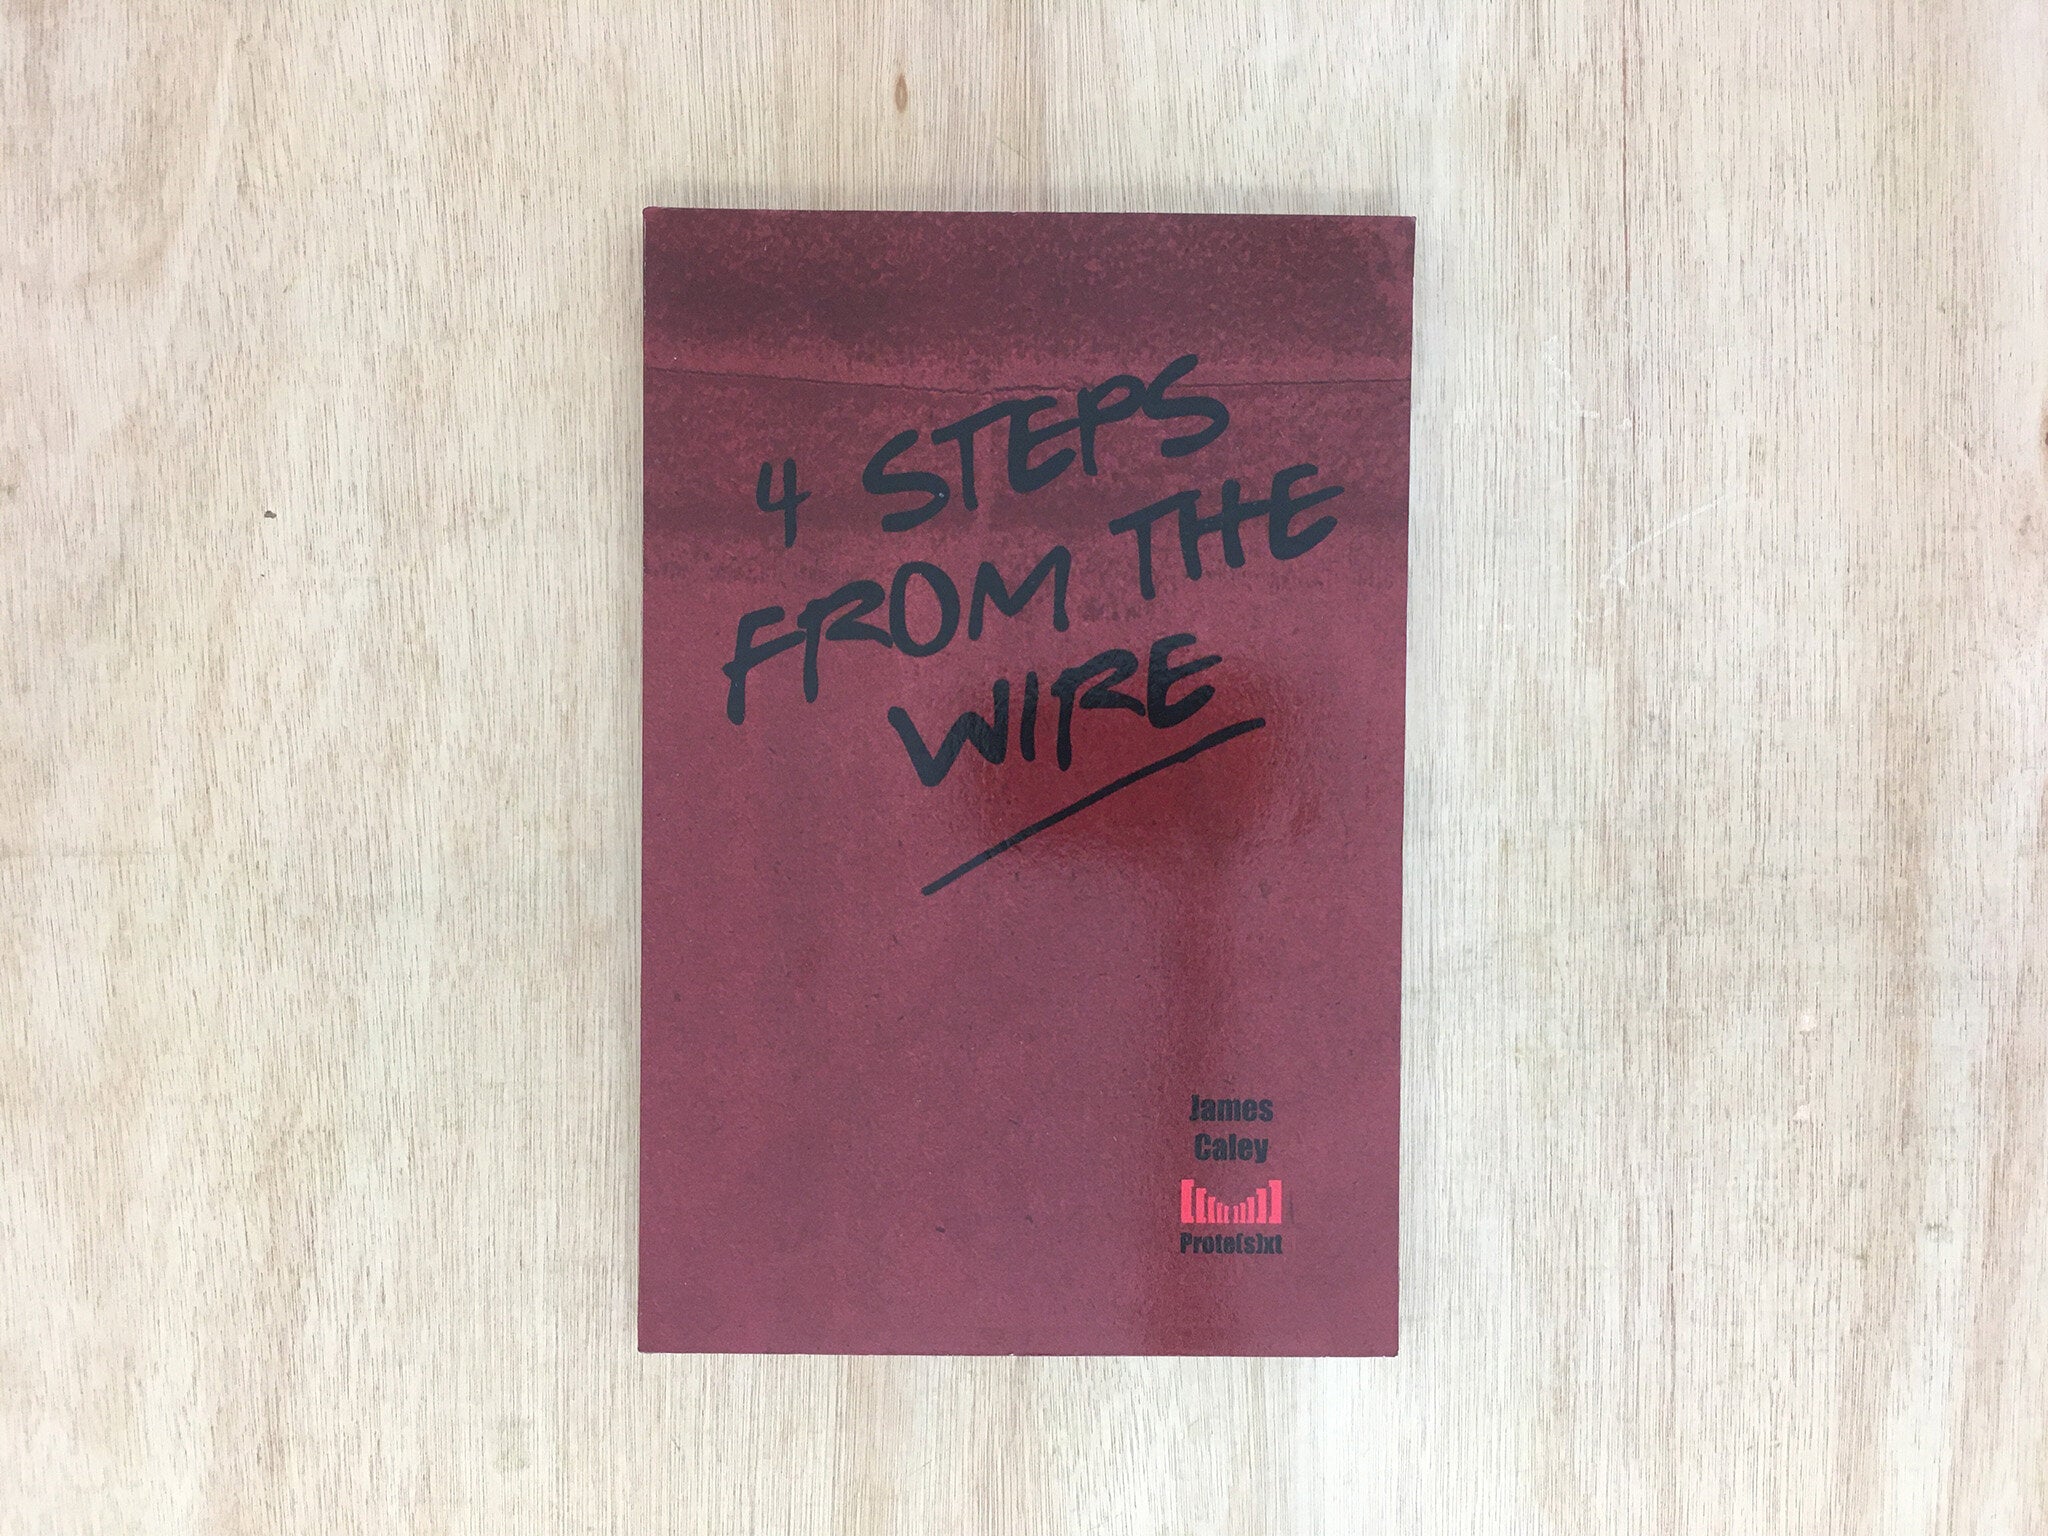 4 STEPS FROM THE WIRE by James Caley